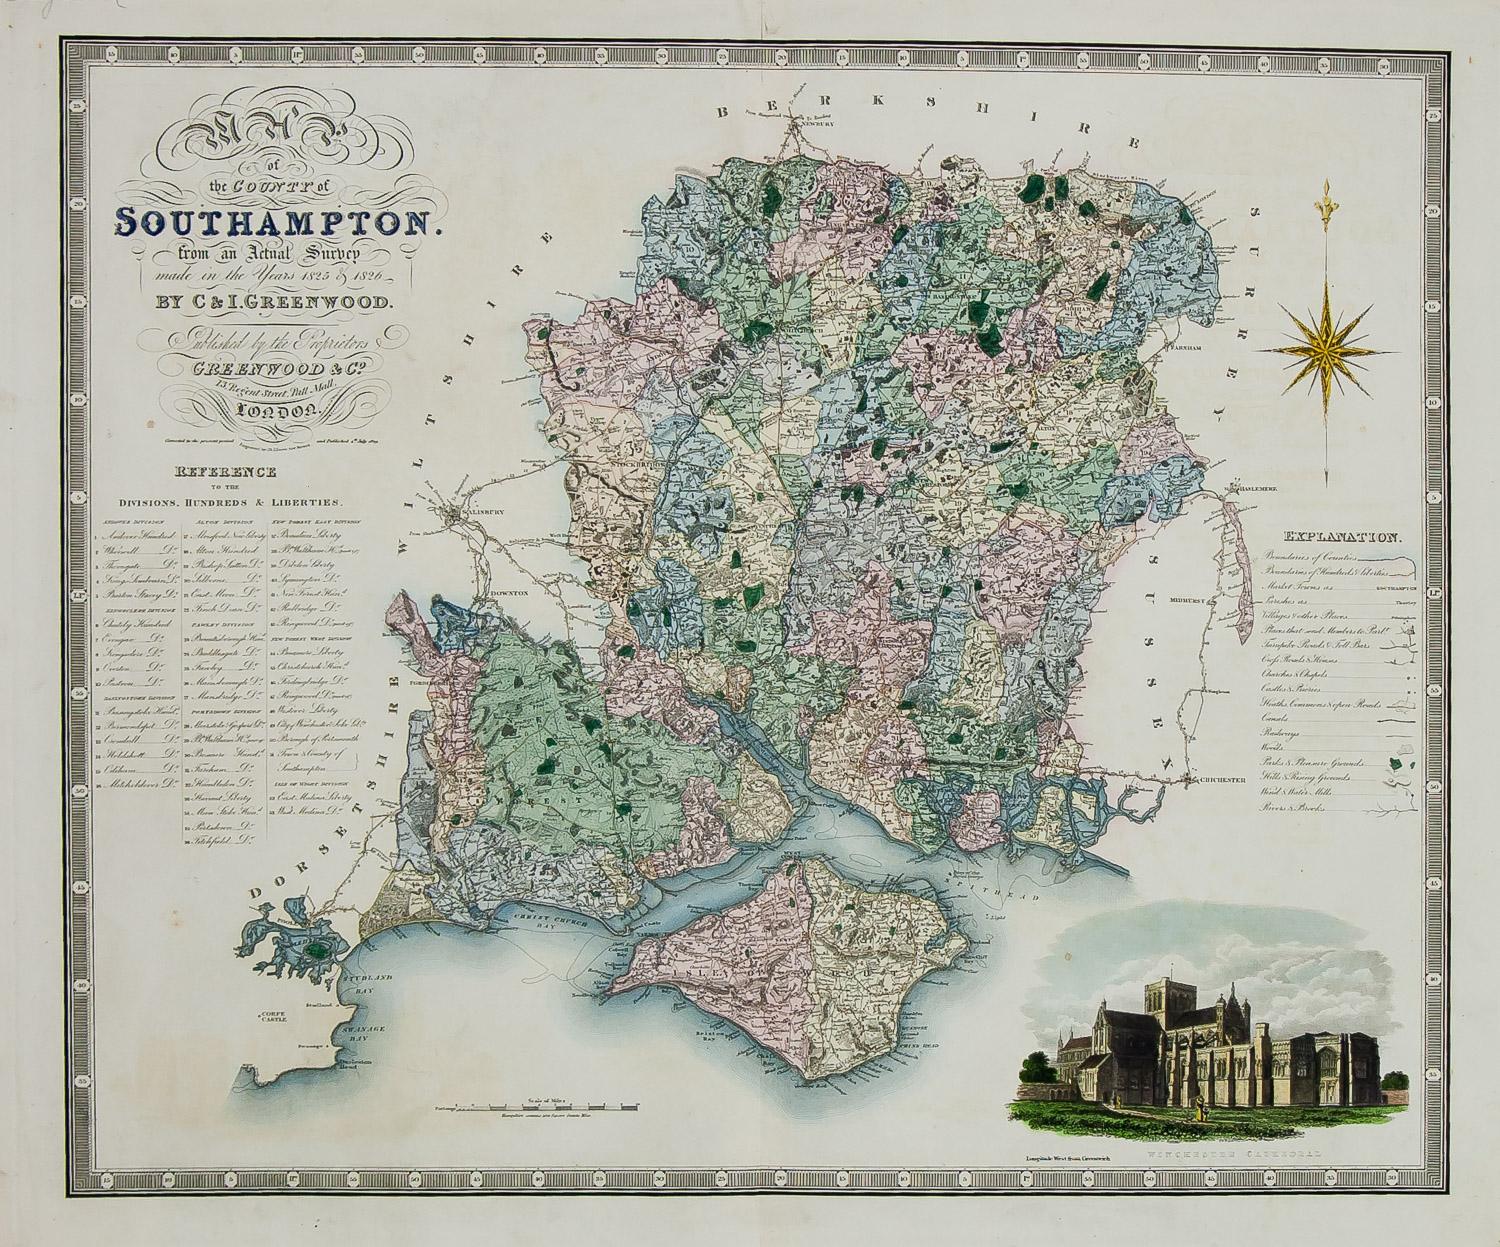 Christopher & John Greenwood Print - England Map of the County of Southampton from an Actual Survey